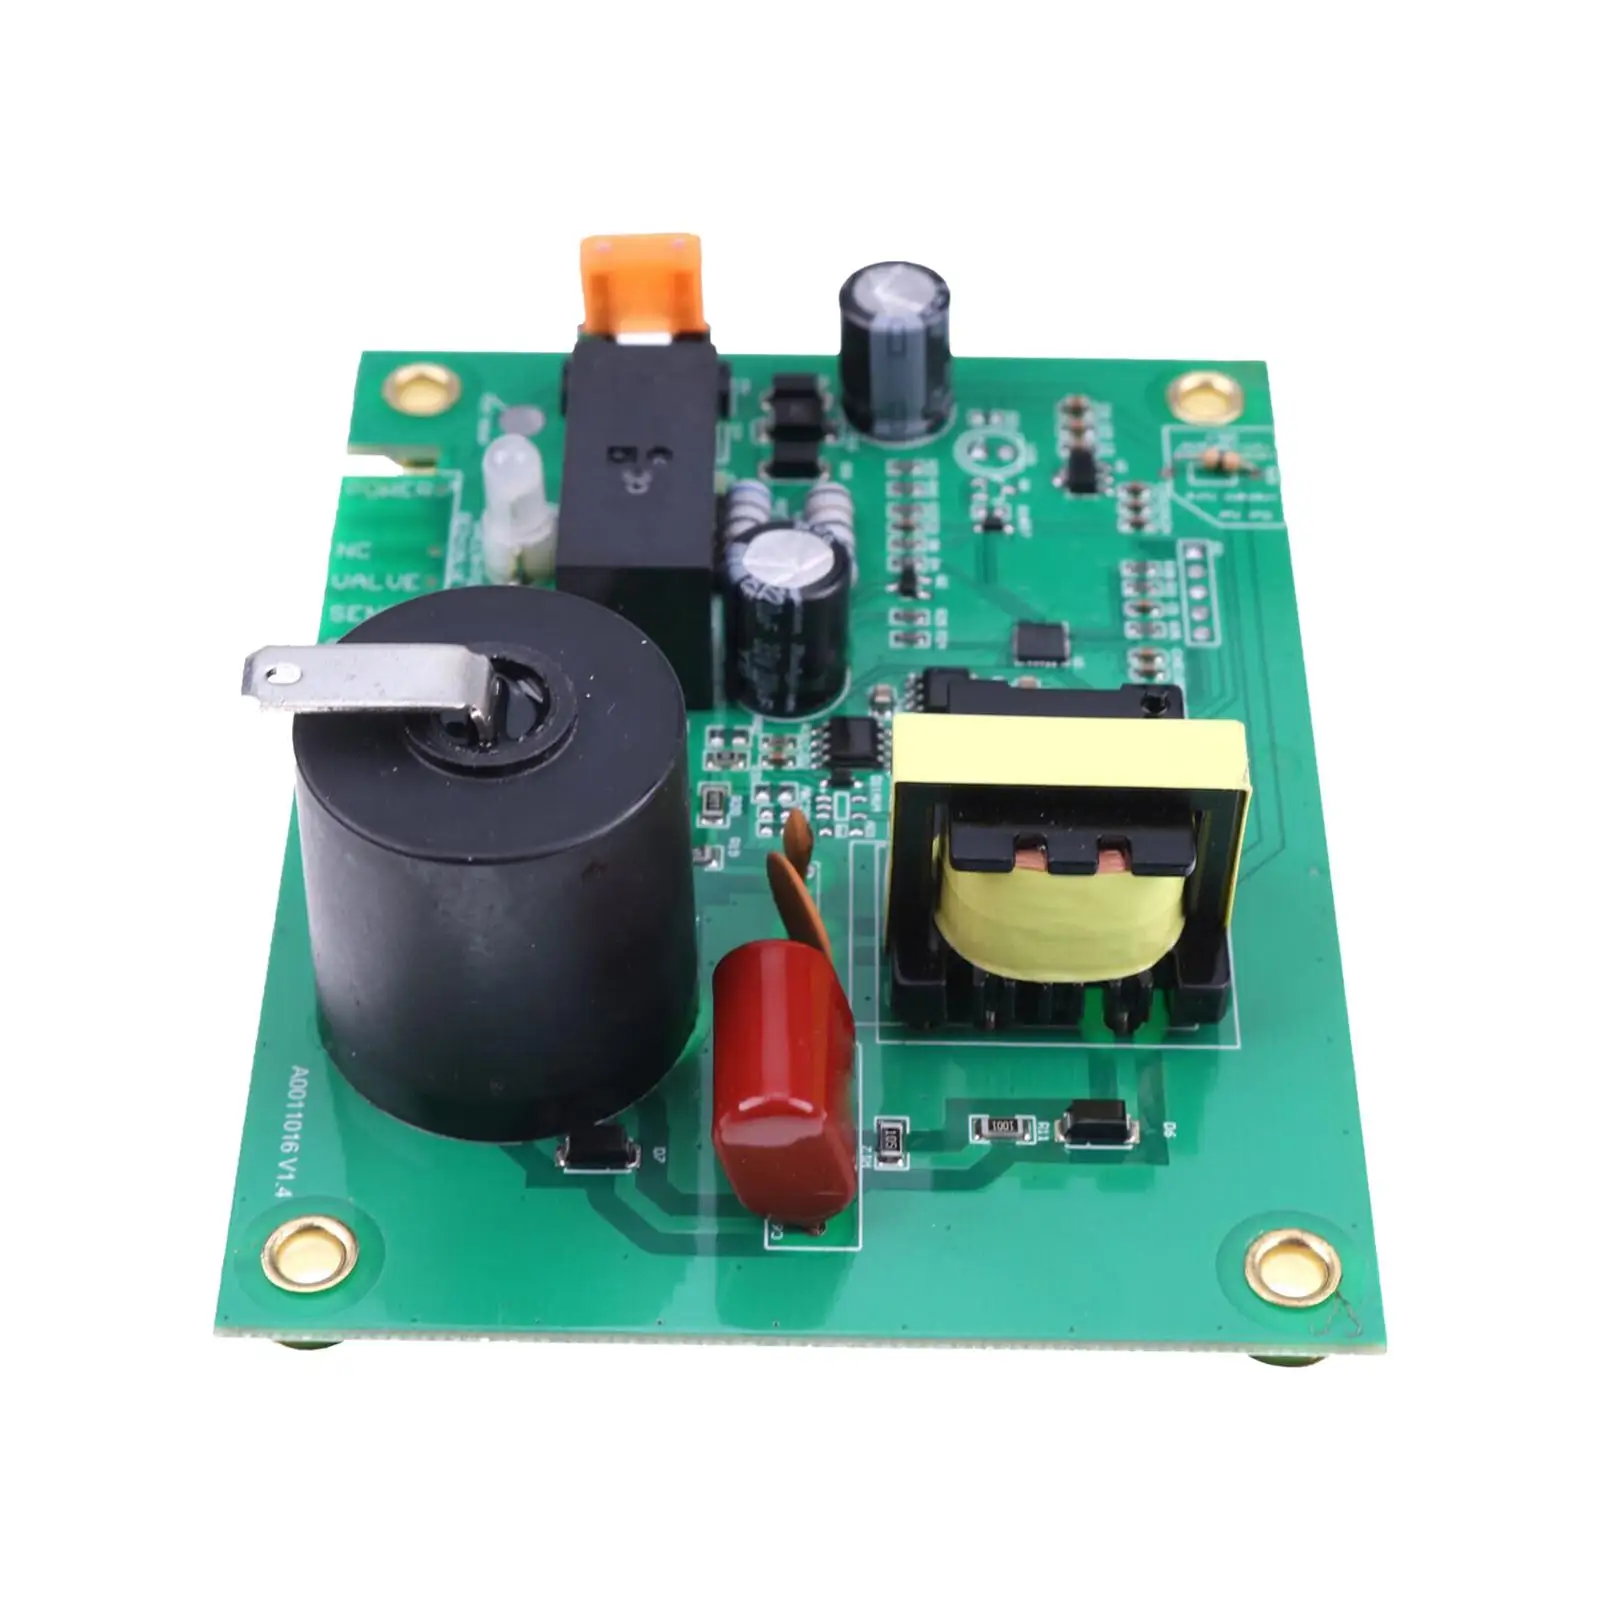 Ignition Board Uib S Board DC 12V Replacement Electronics Accessories Sturdy